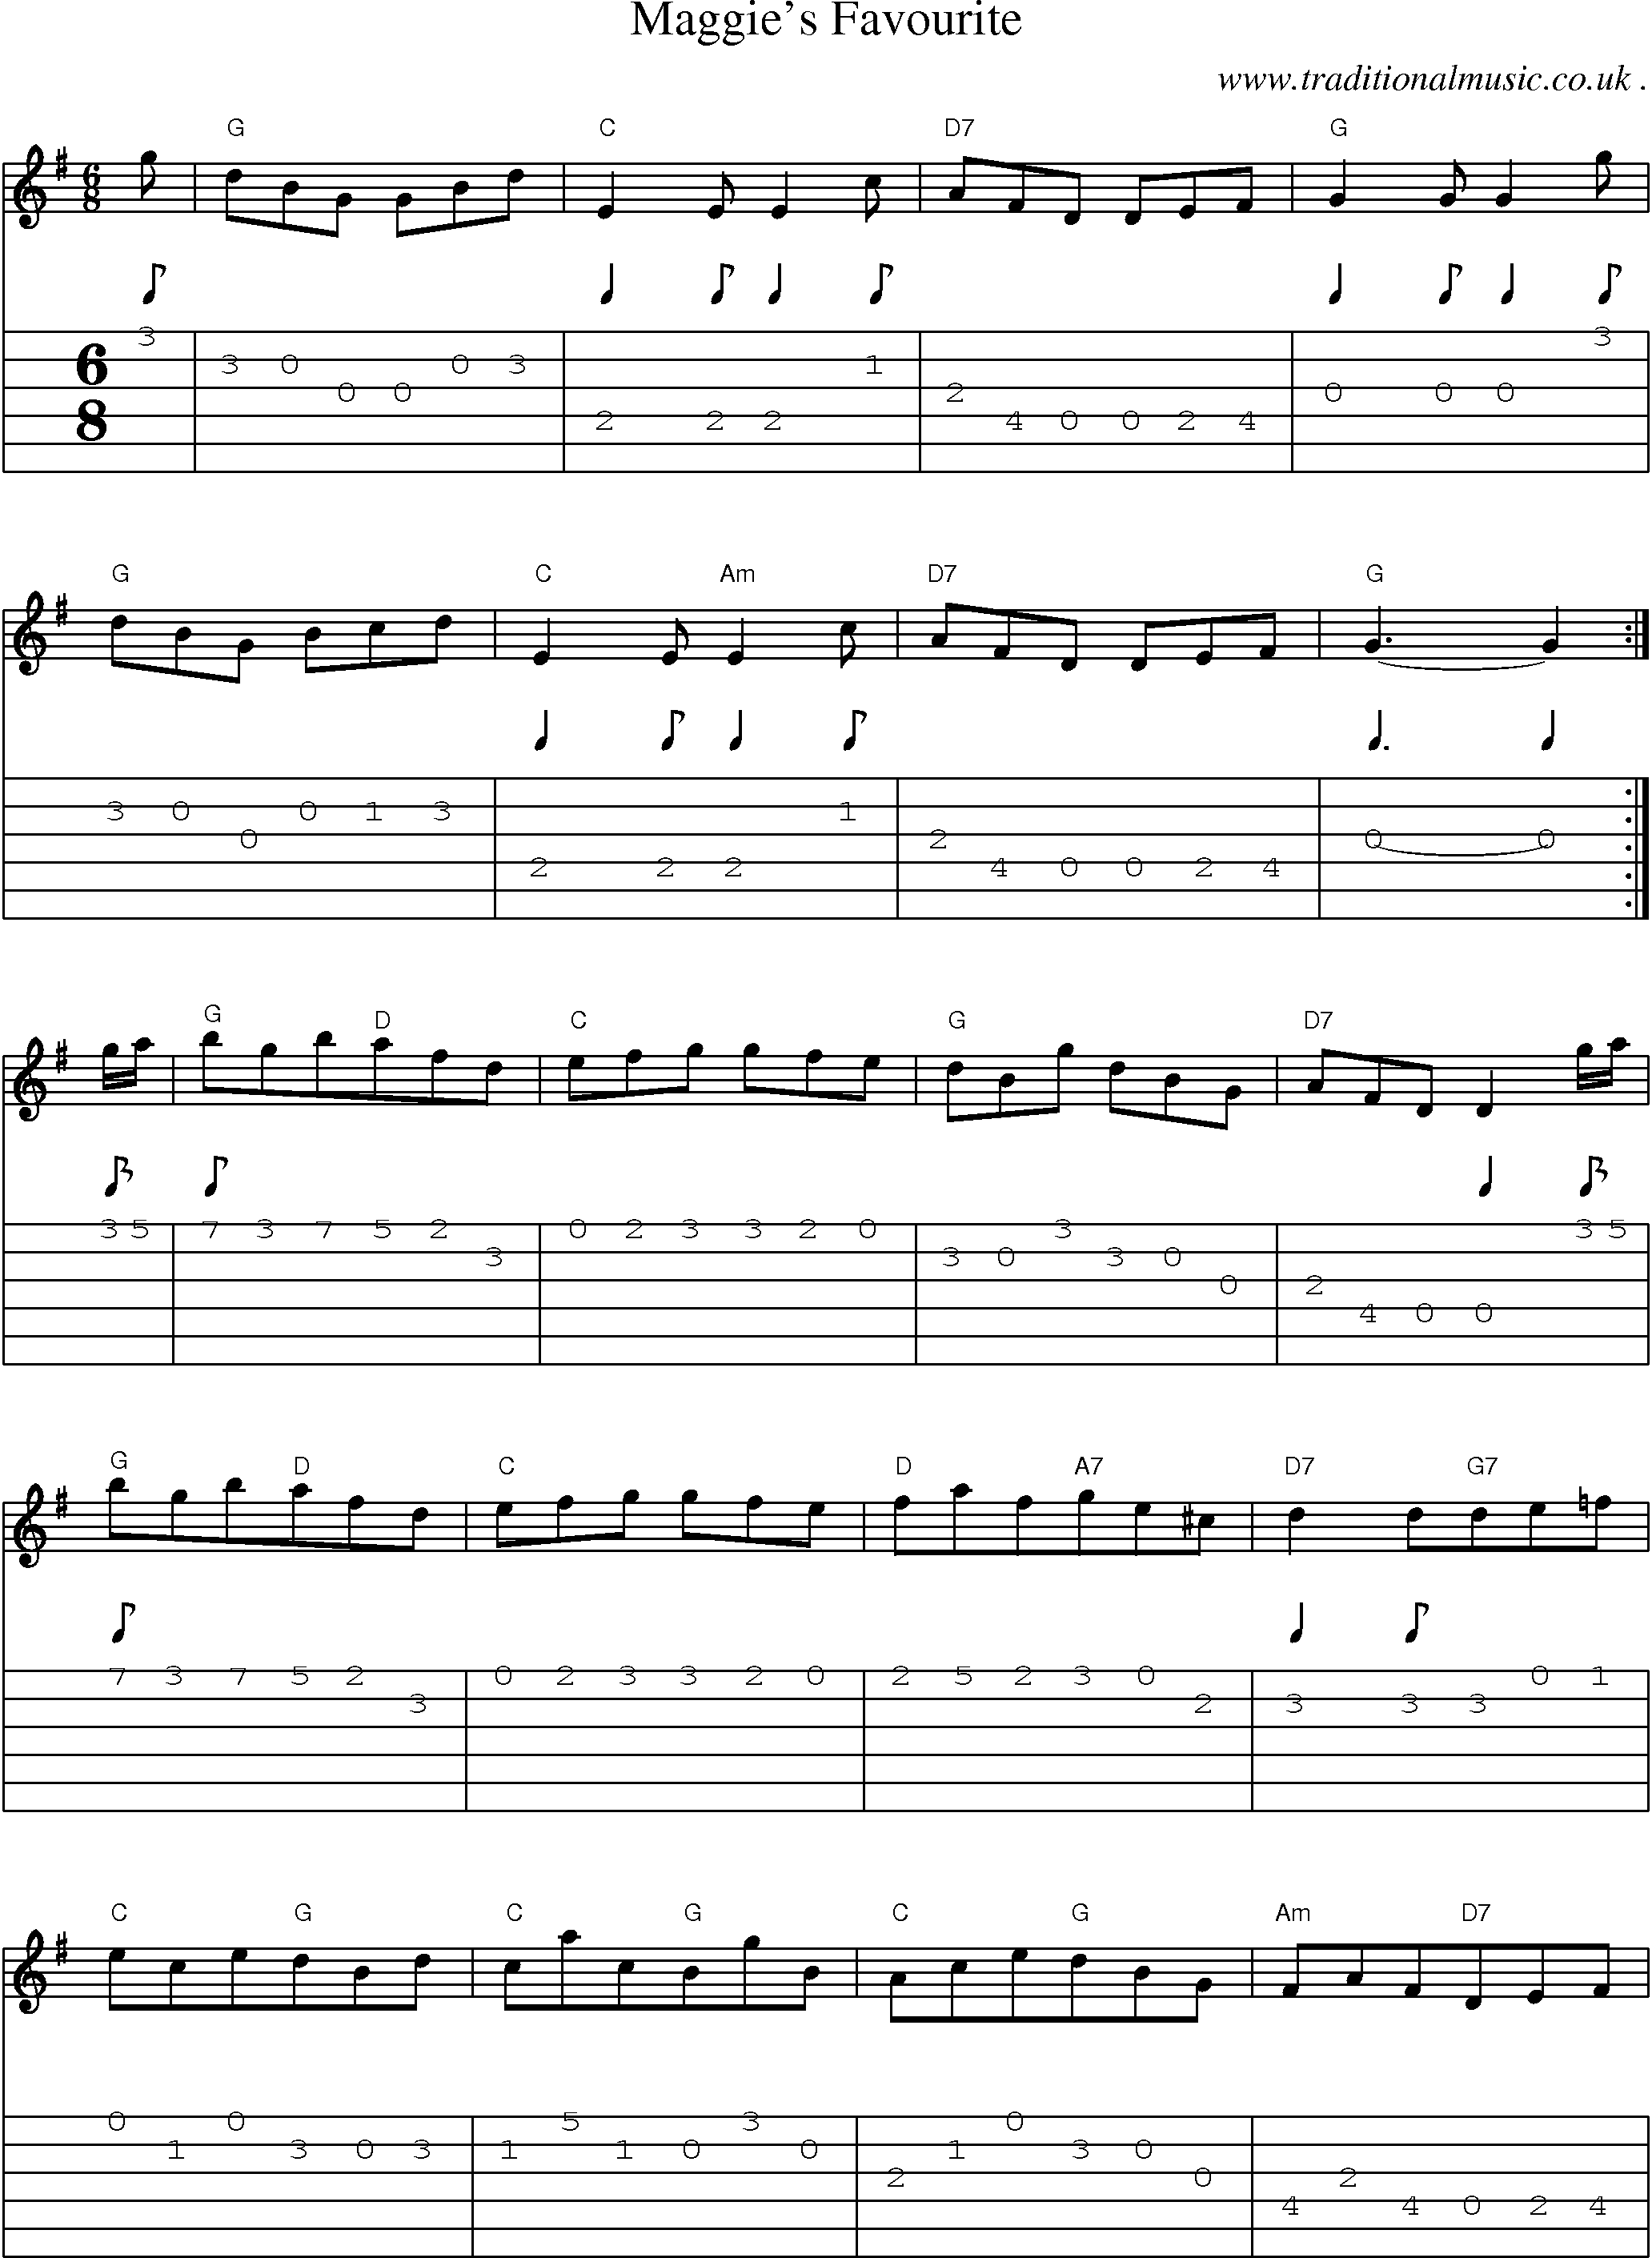 Sheet-Music and Guitar Tabs for Maggies Favourite